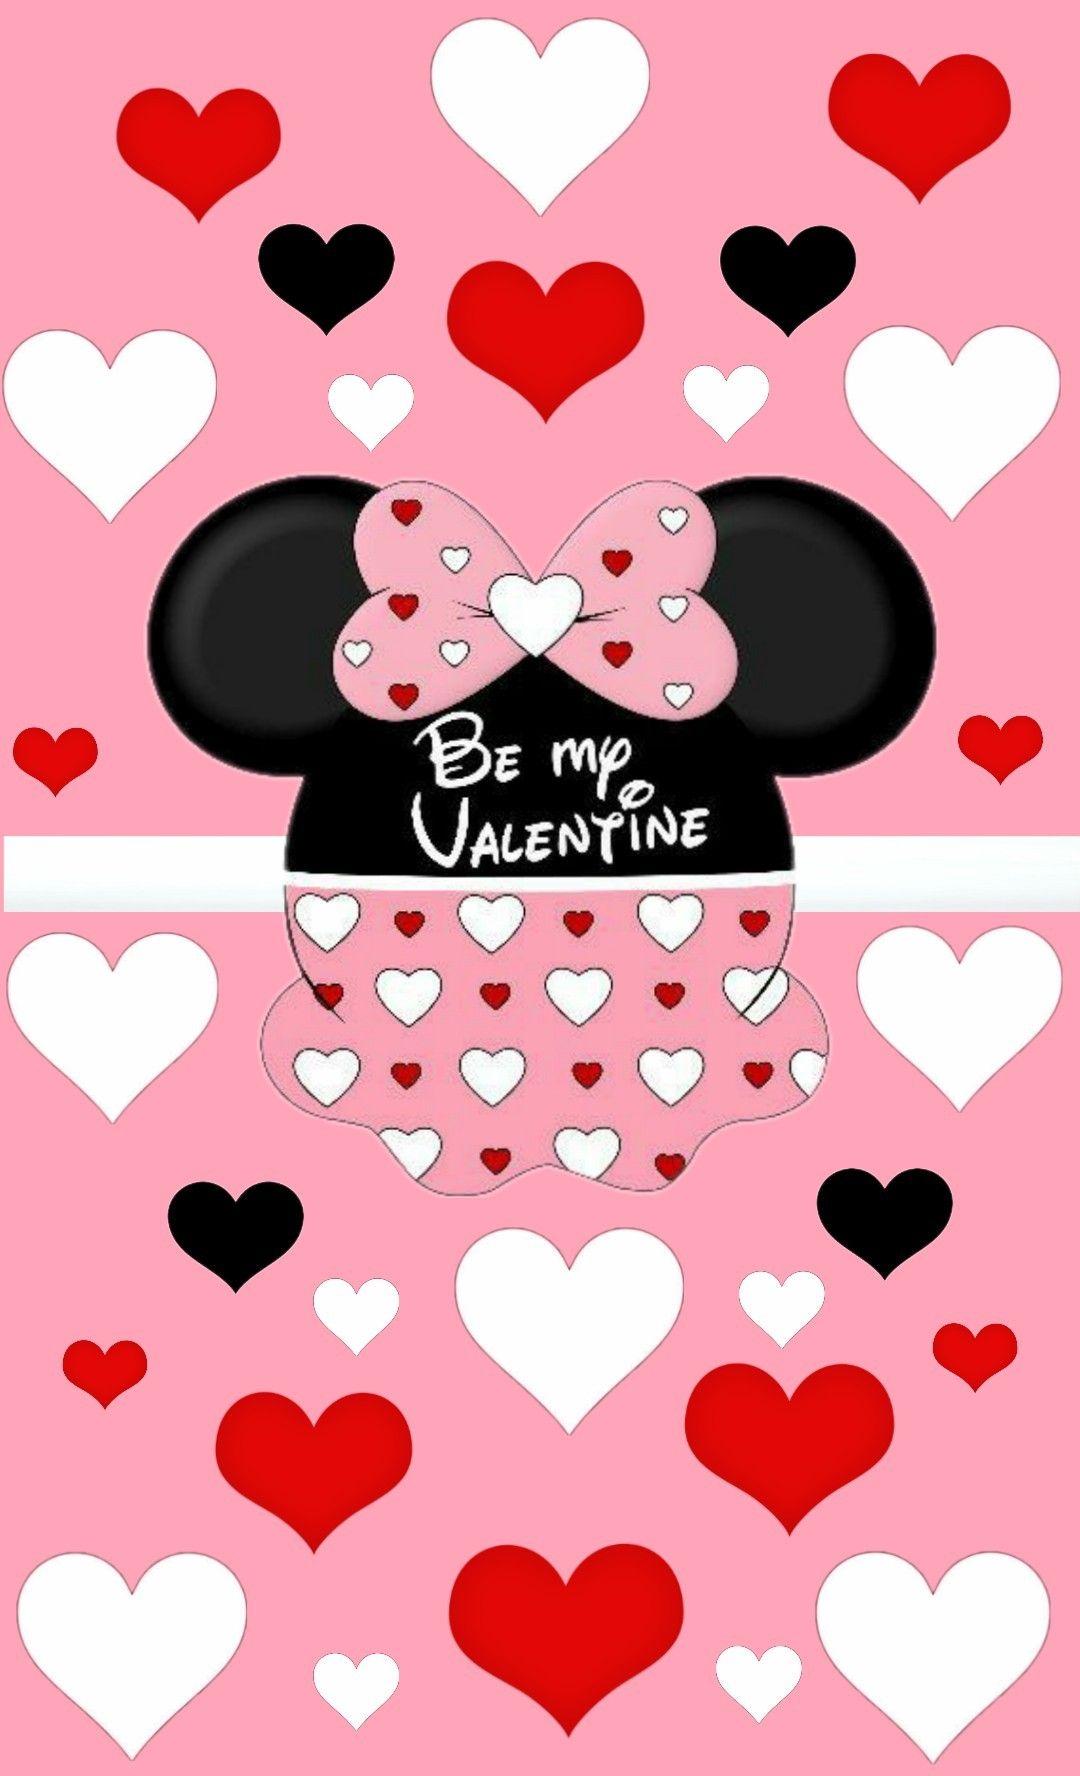 Valentines Day Treats. Disney valentines, Minnie mouse image, Cute wallpaper